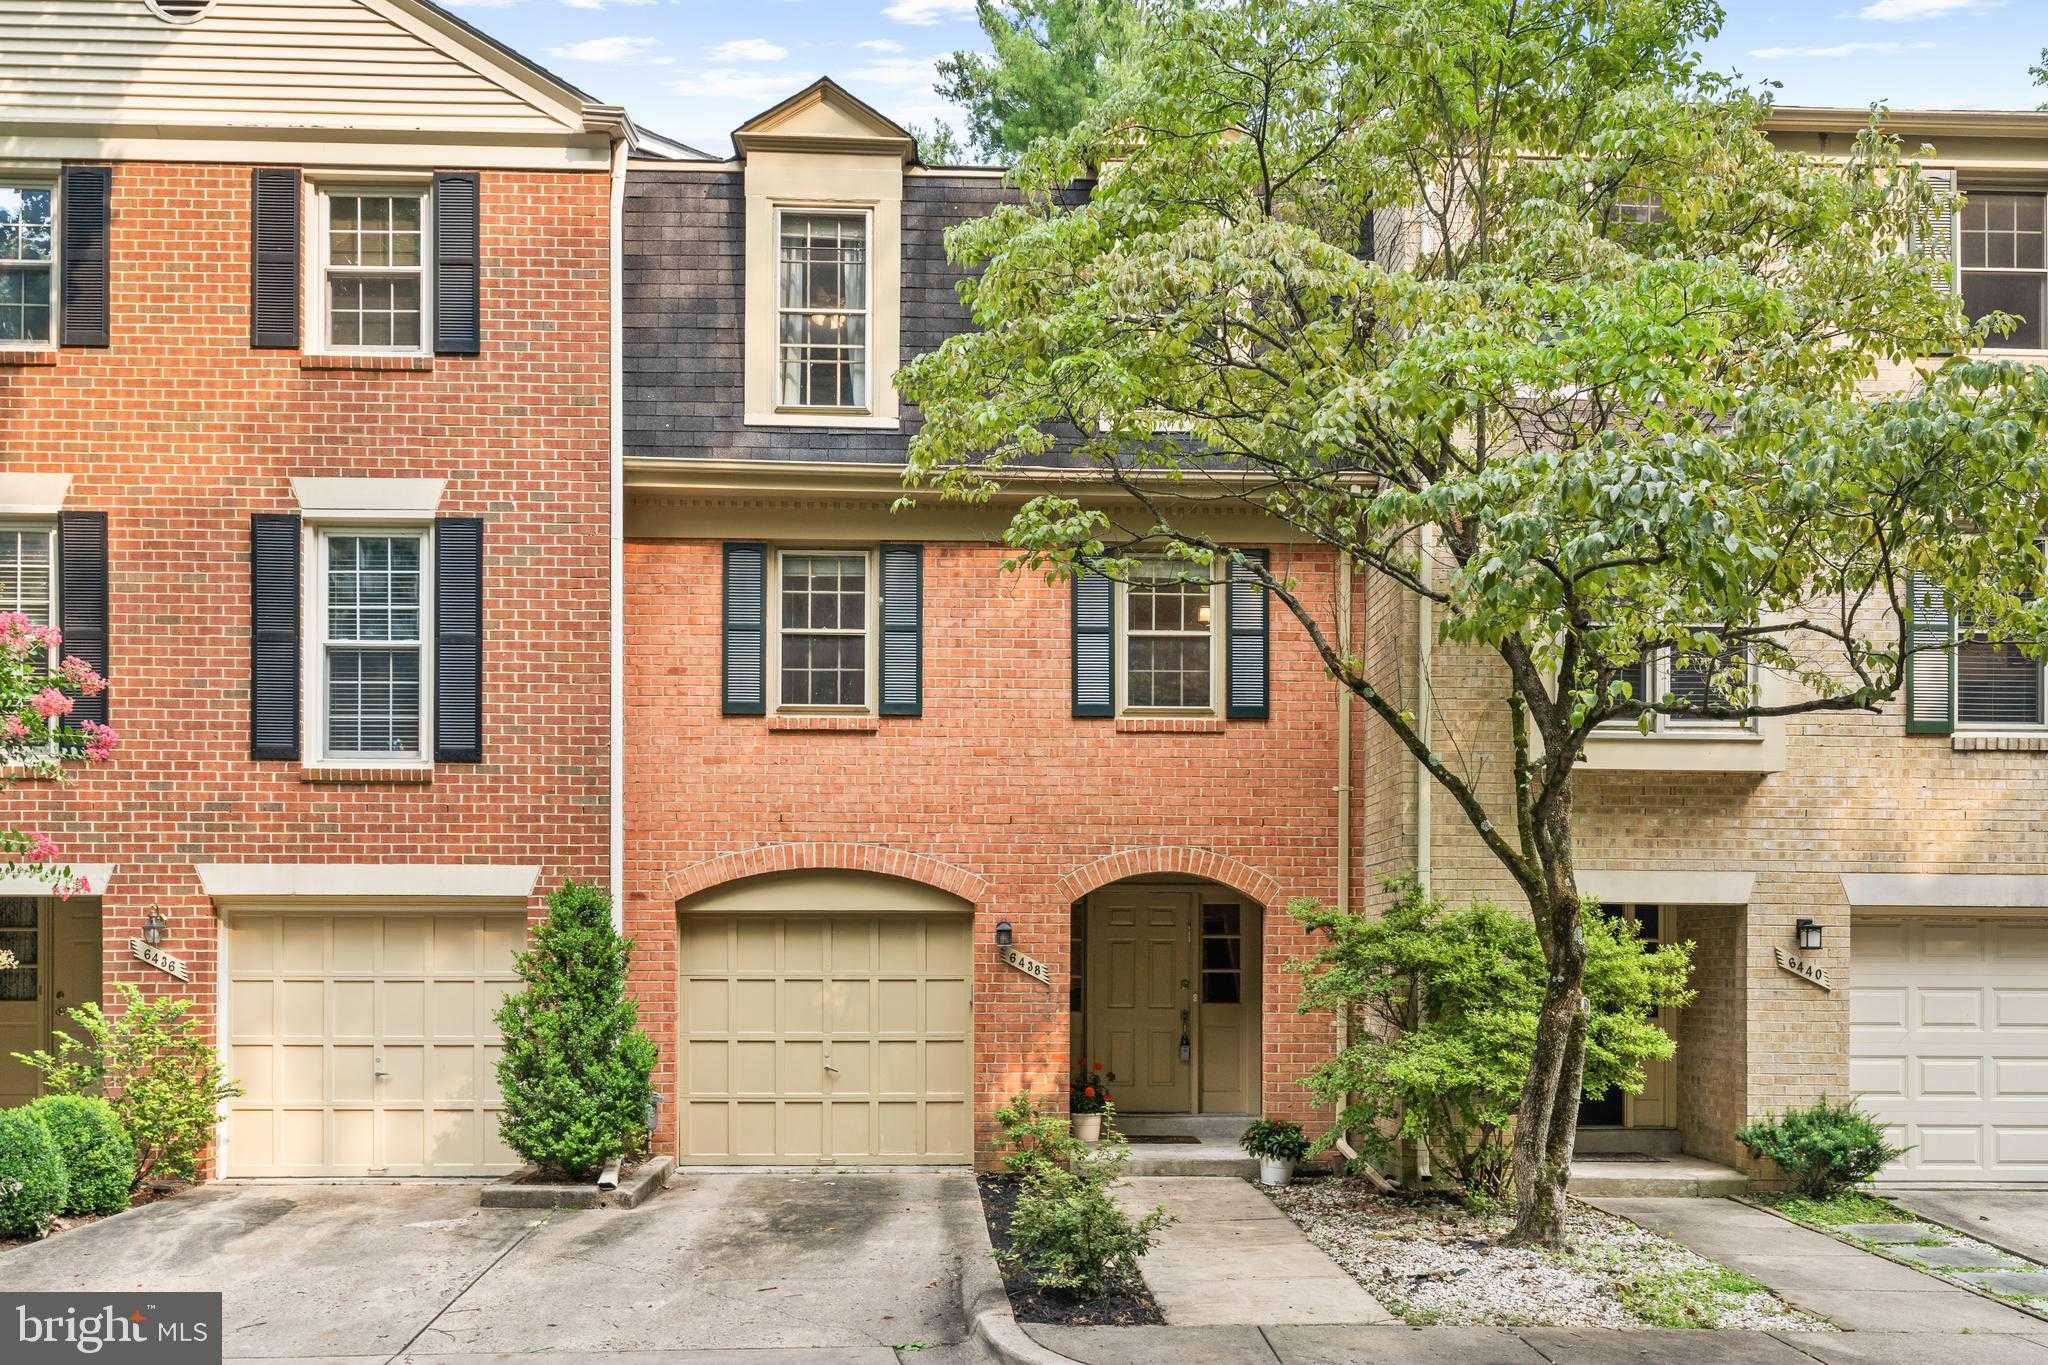 View ROCKVILLE, MD 20852 townhome